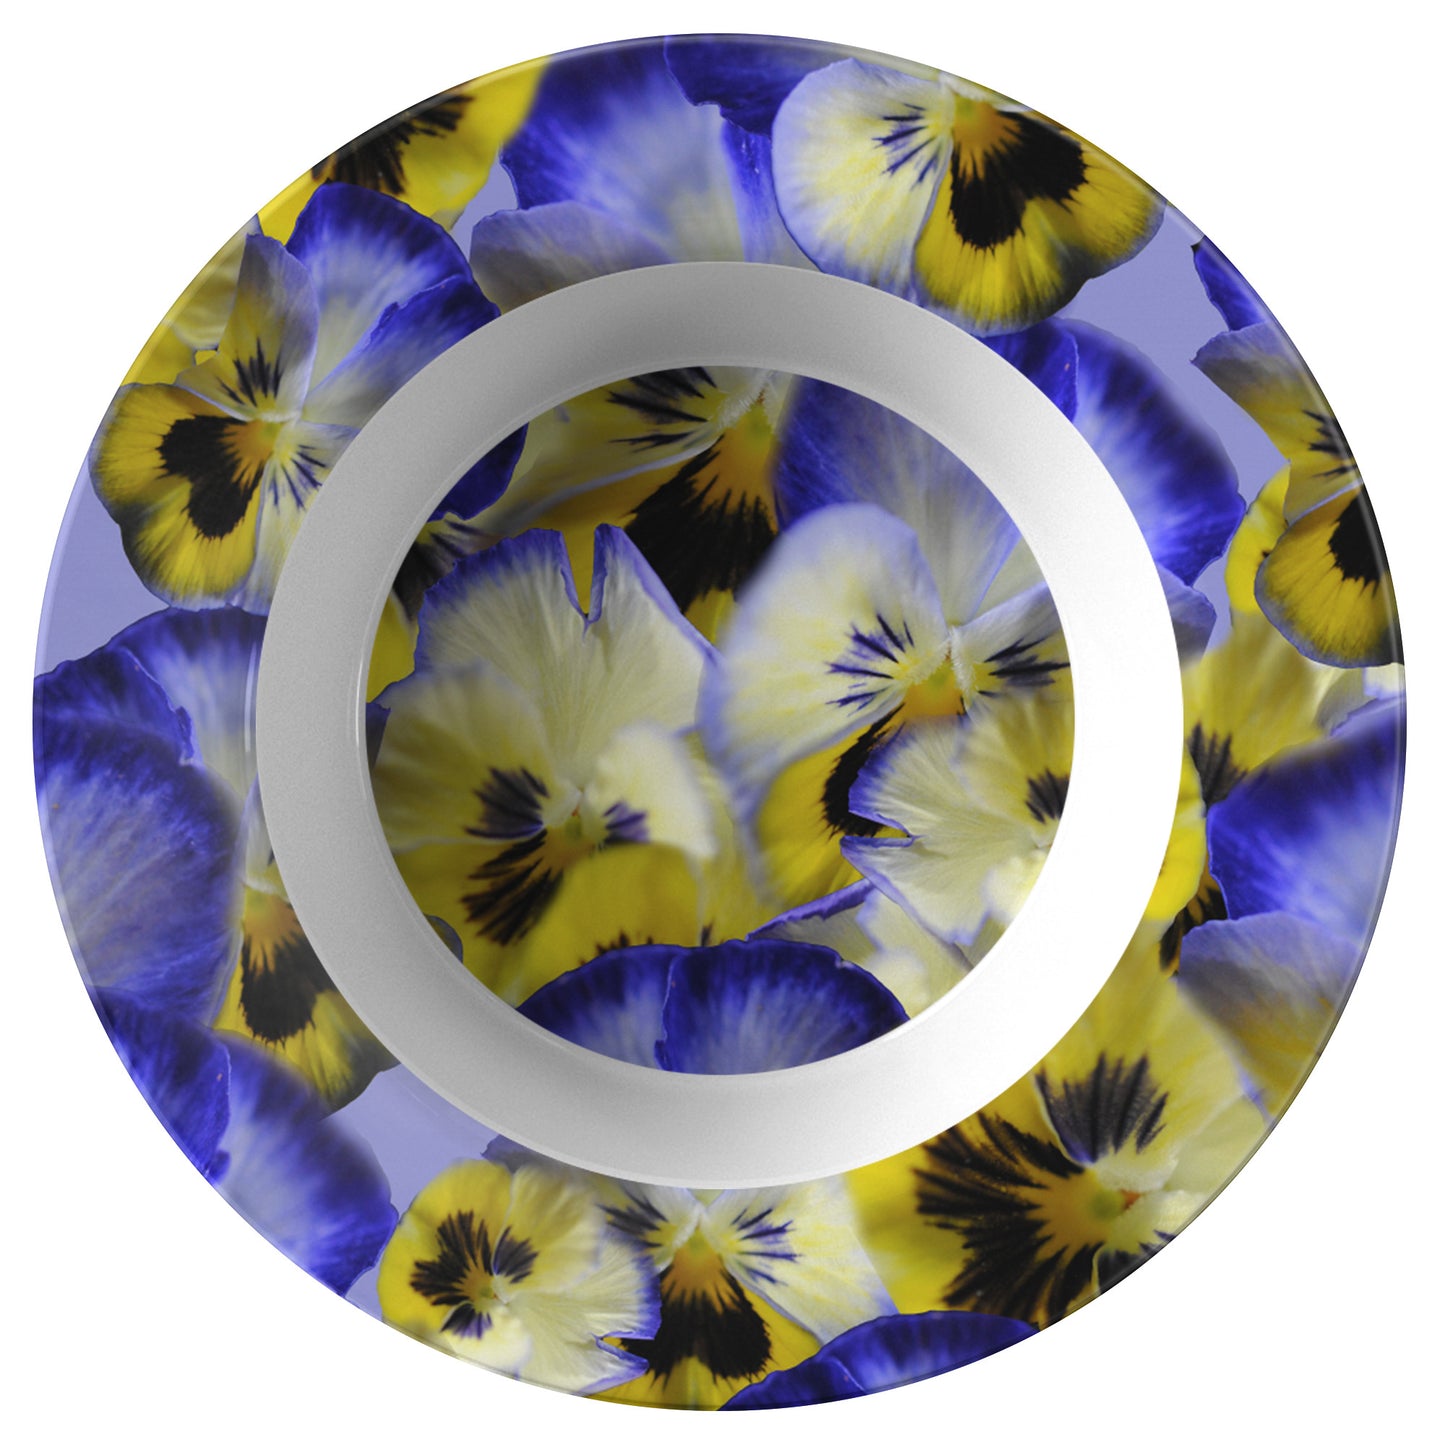 Blue and Yellow Pansies Collage Dinner Bowl